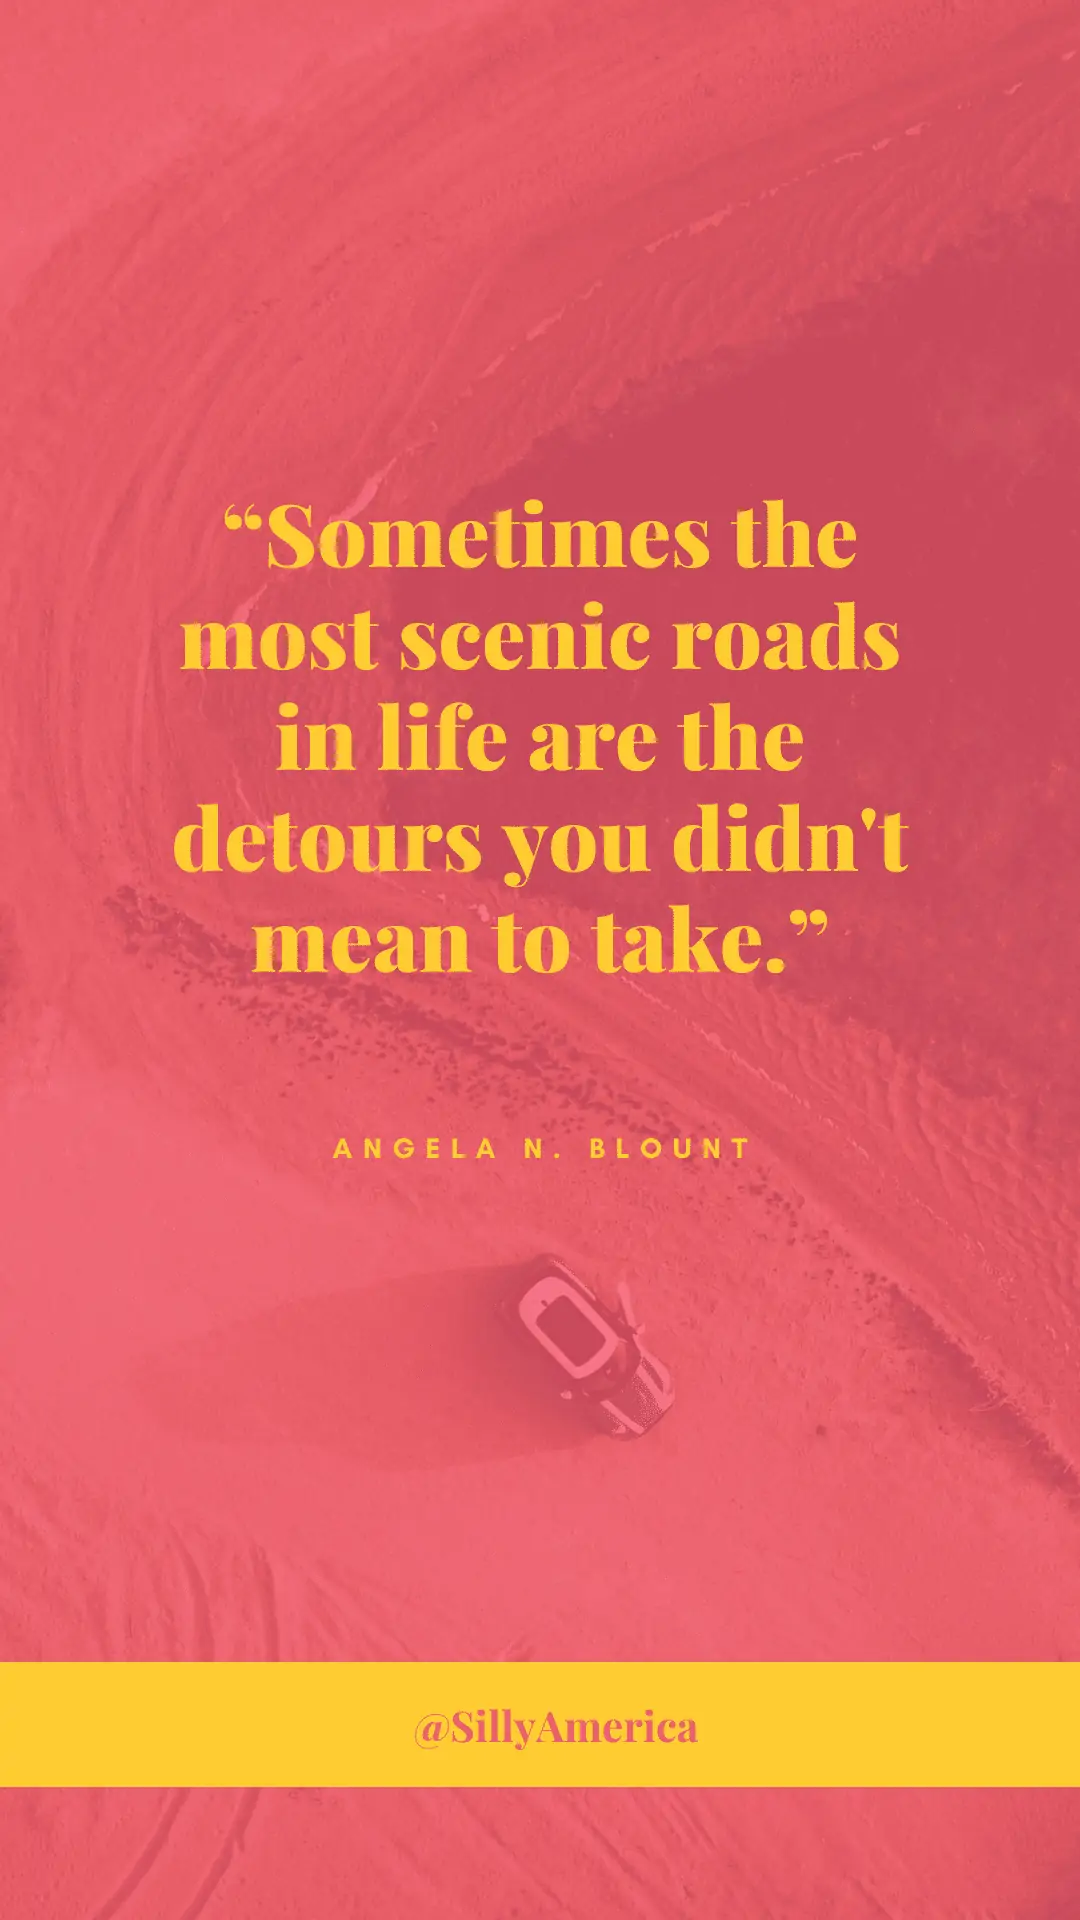 “Sometimes the most scenic roads in life are the detours you didn’t mean to take.” Angela N. Blount, Once Upon an Ever After